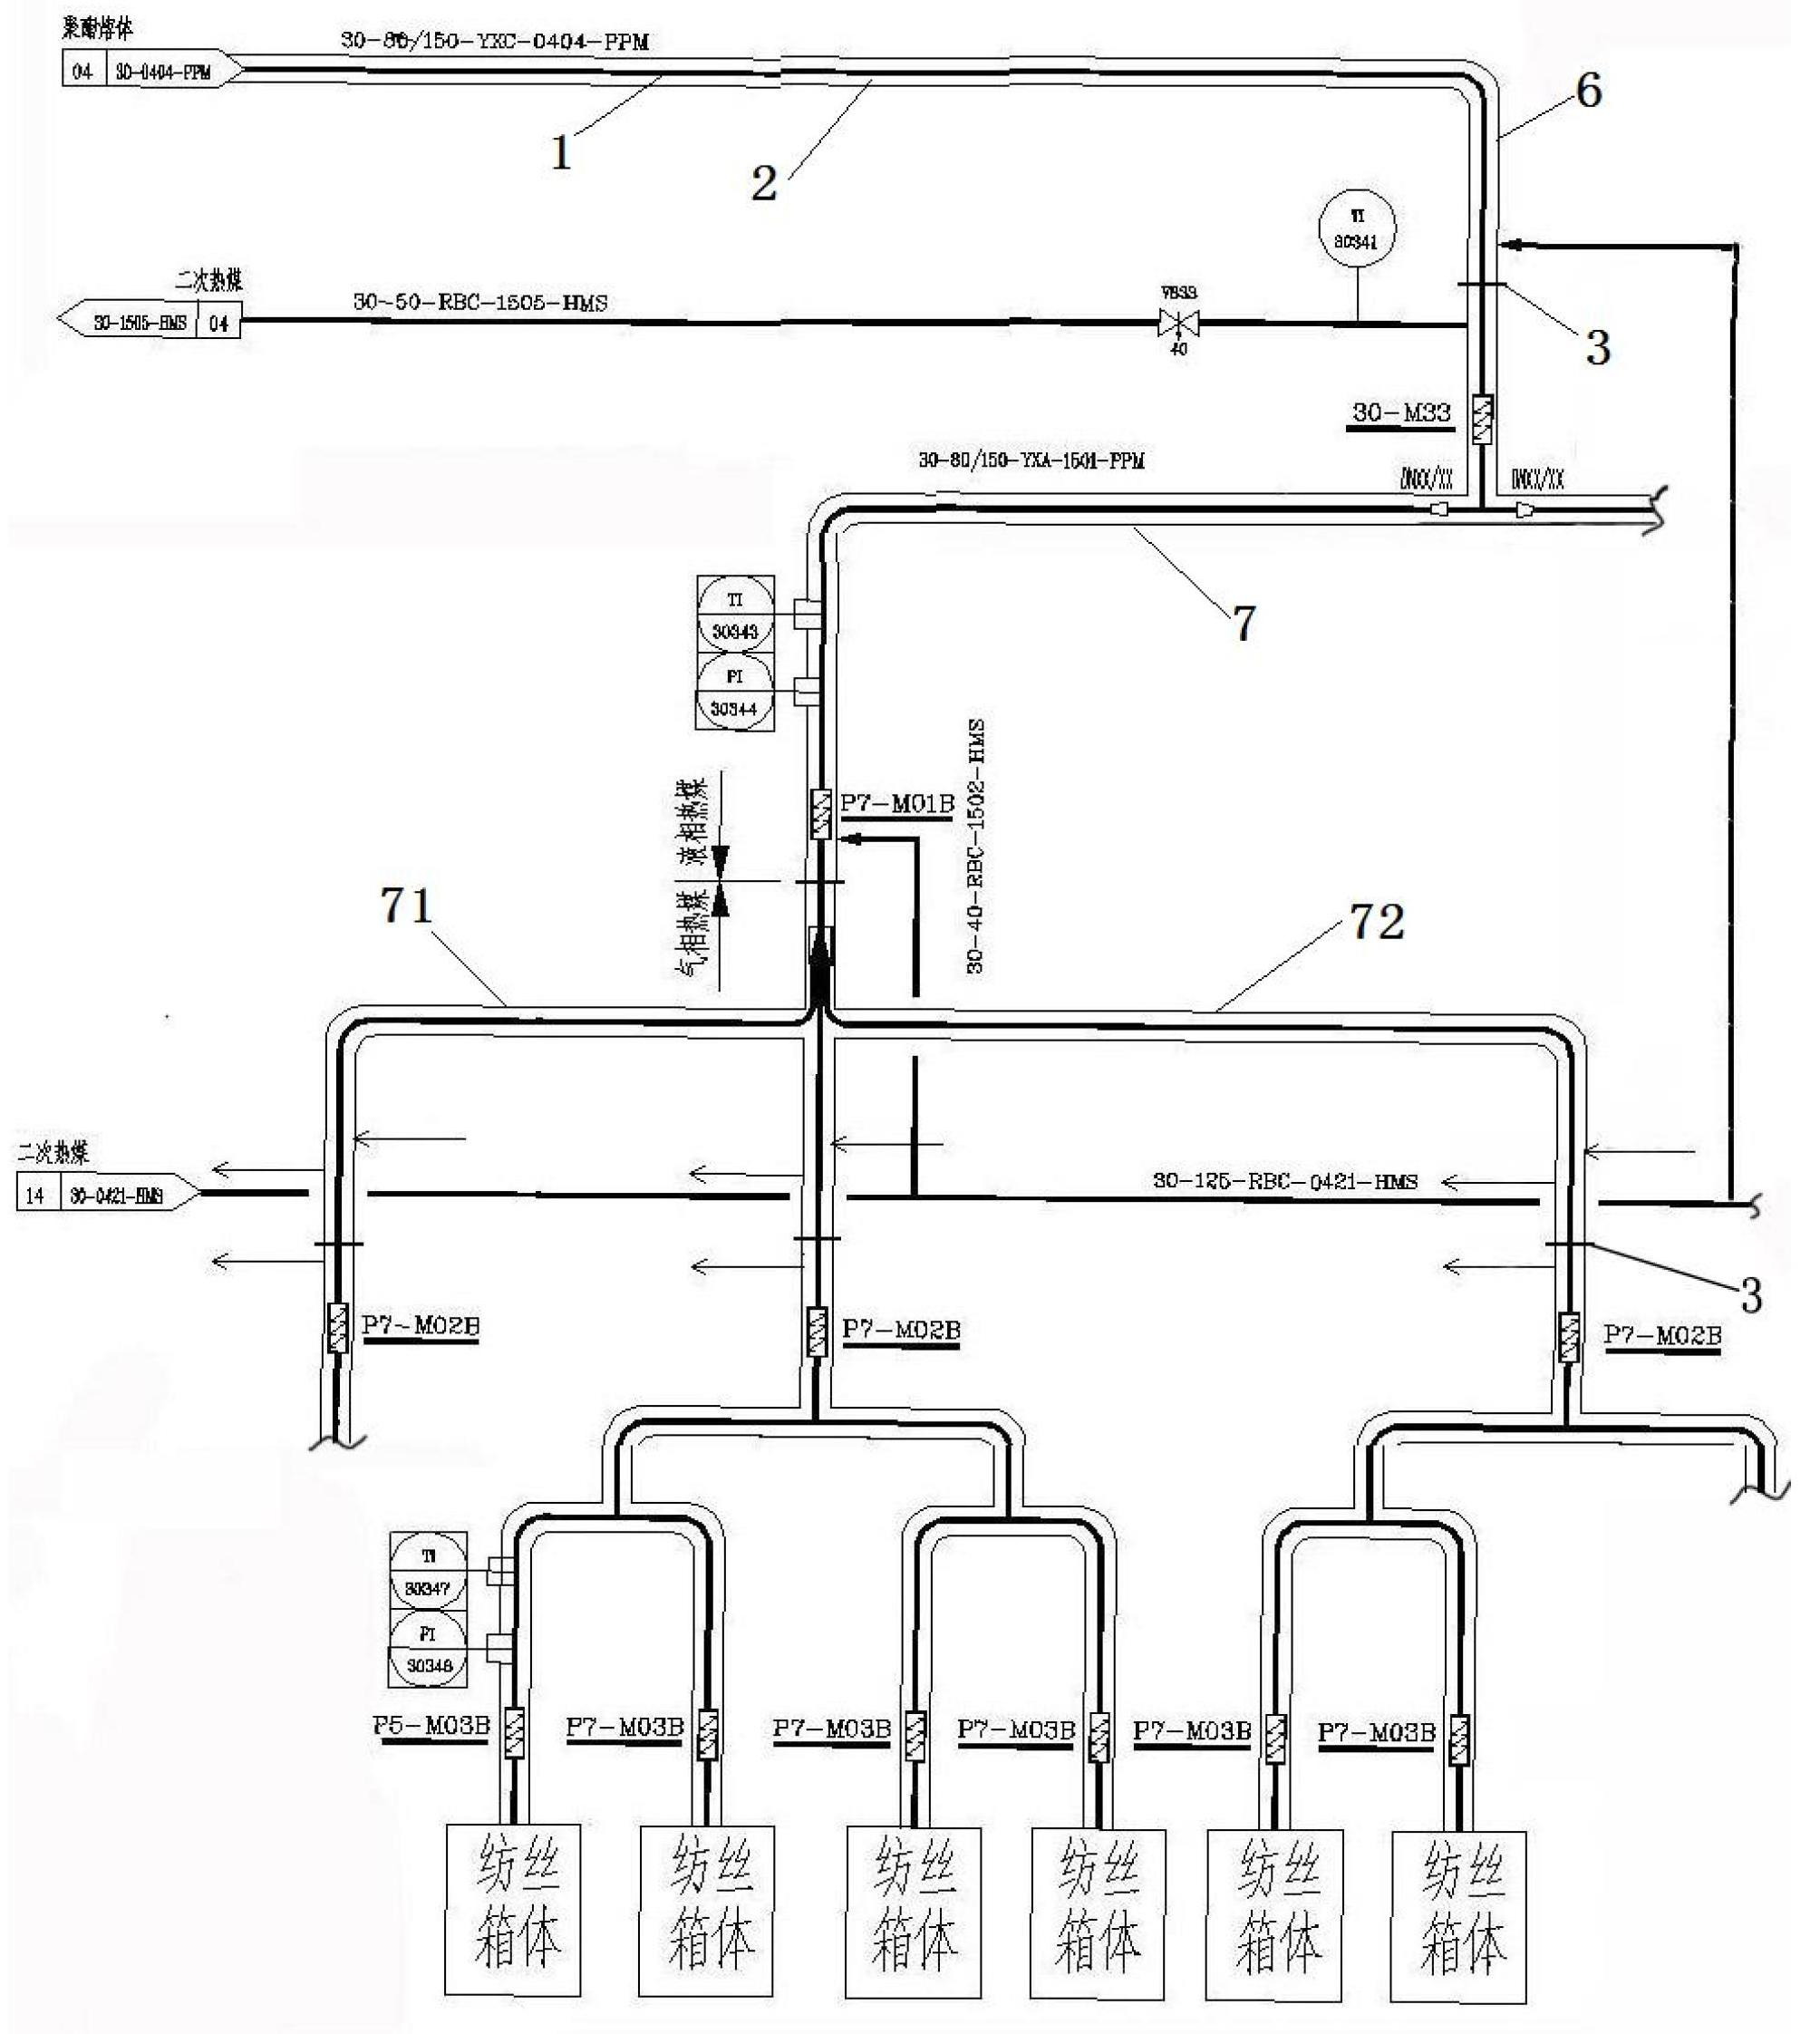 Melt delivery pipeline system for melt direct-spinning process